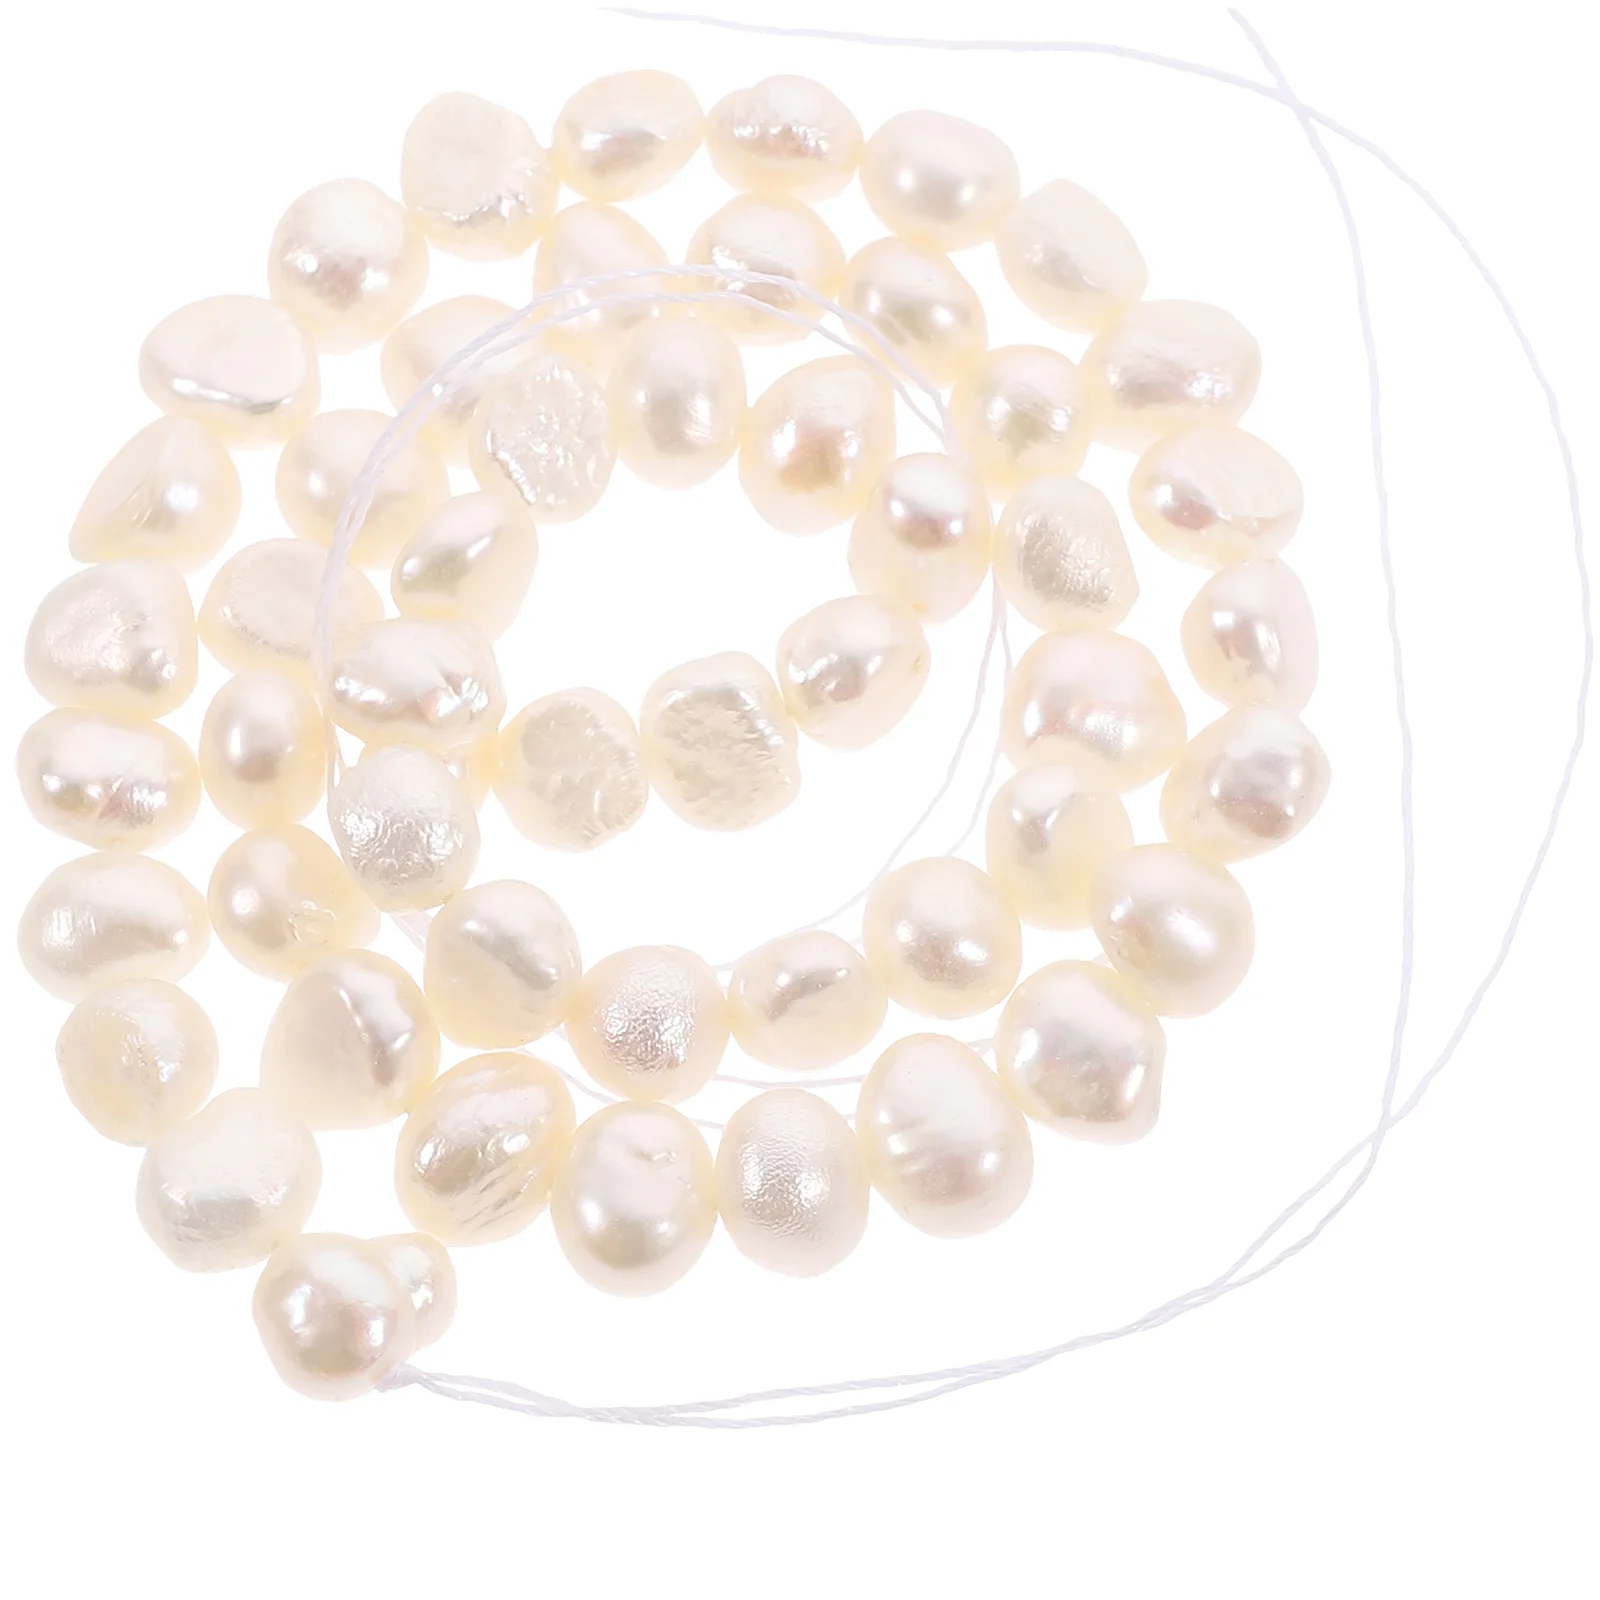 

Pearl Beads Bead Spacer Bracelet Jewelry Round Loose Real Natural Crafts Baroque Strands Cultured Freshwater Gemstone Diy Making